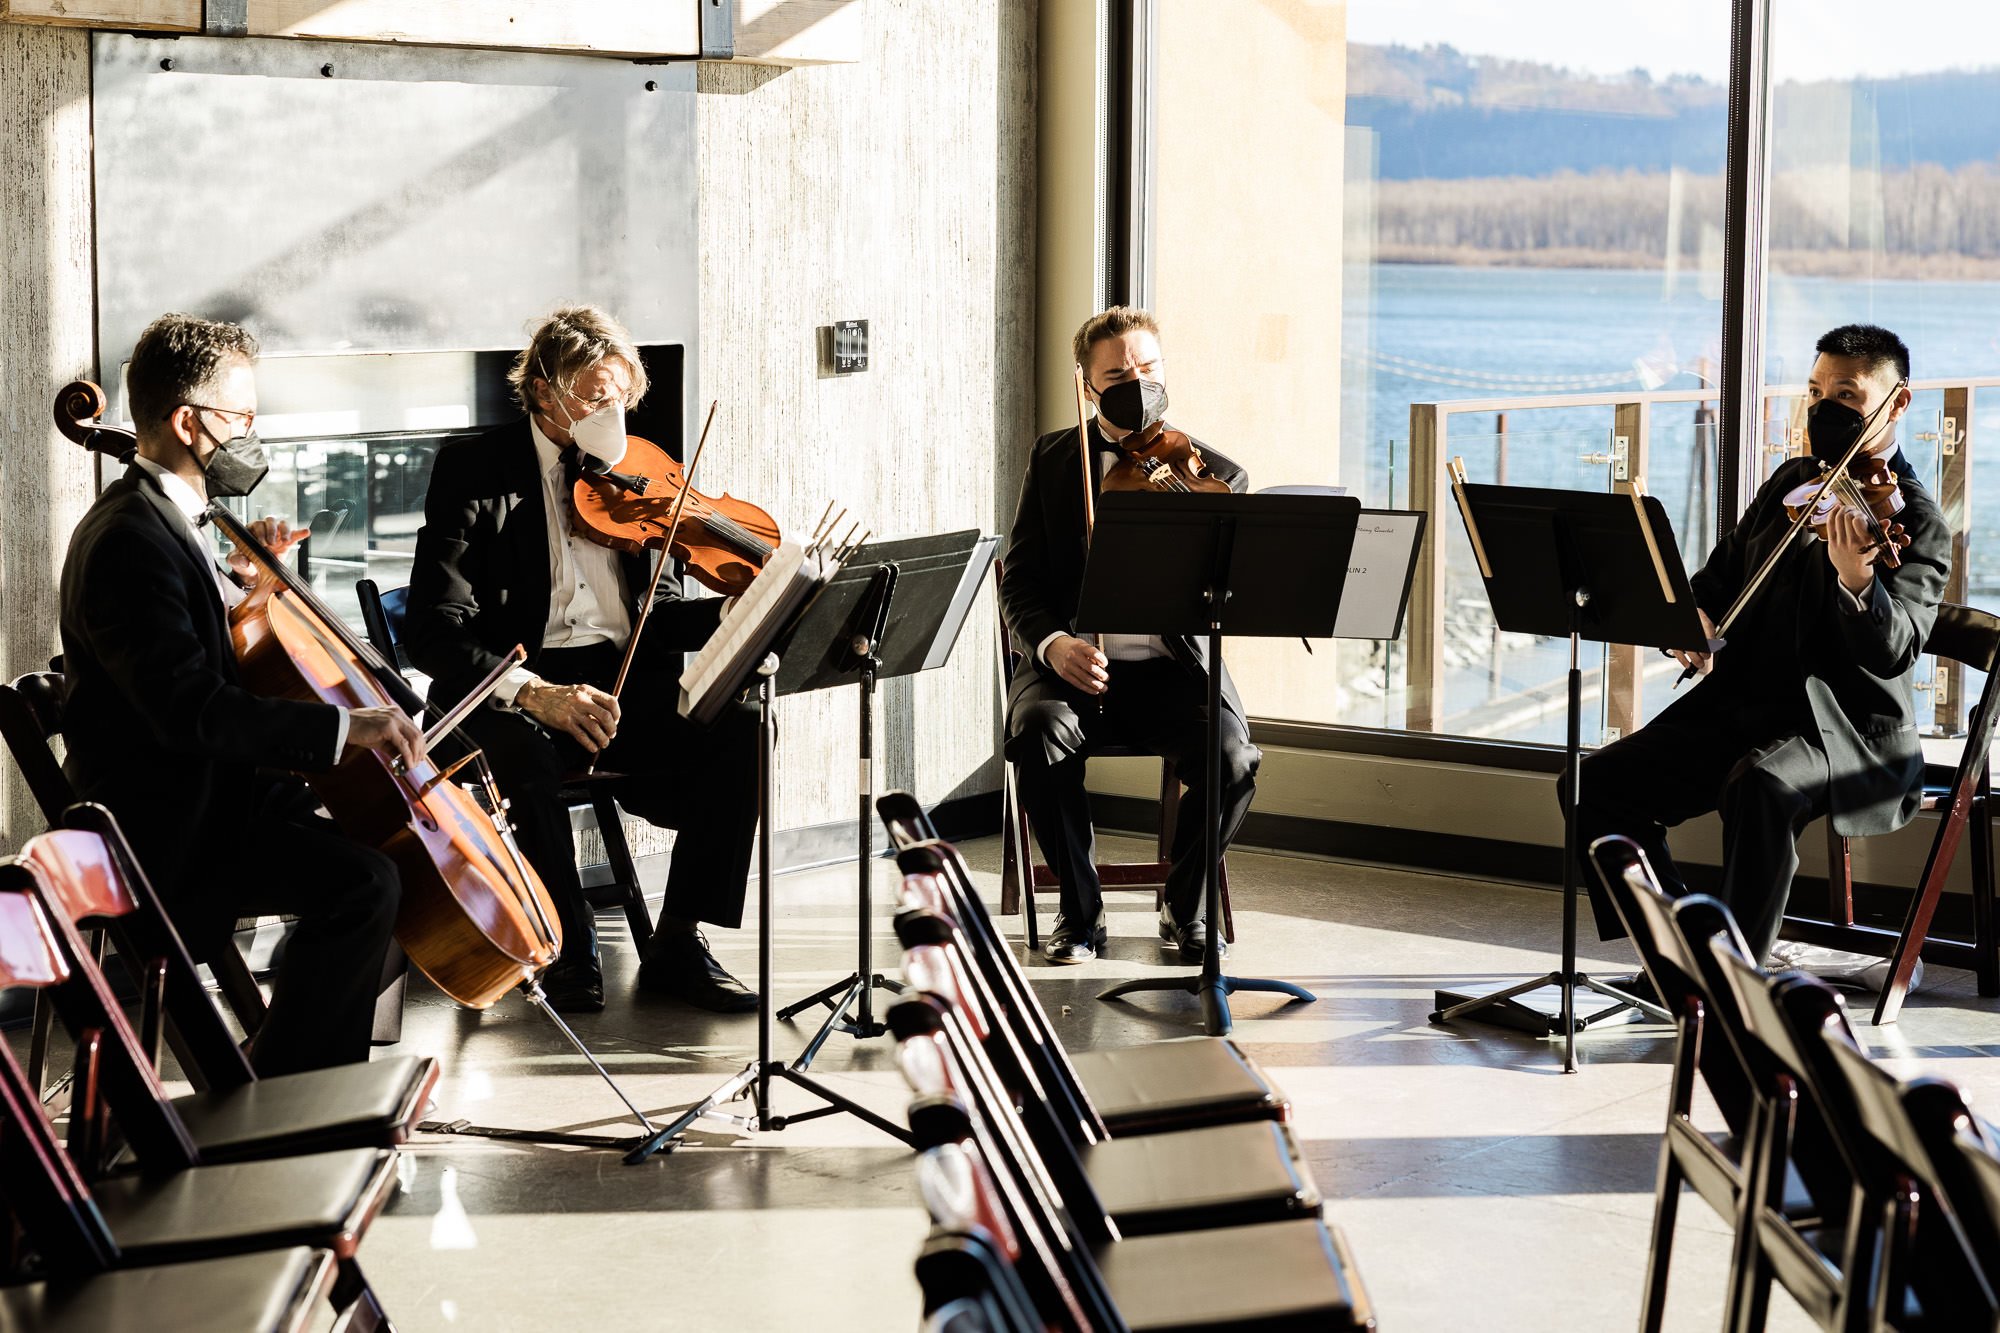 string quartet plays instruments in front of large windows at wedding ceremony